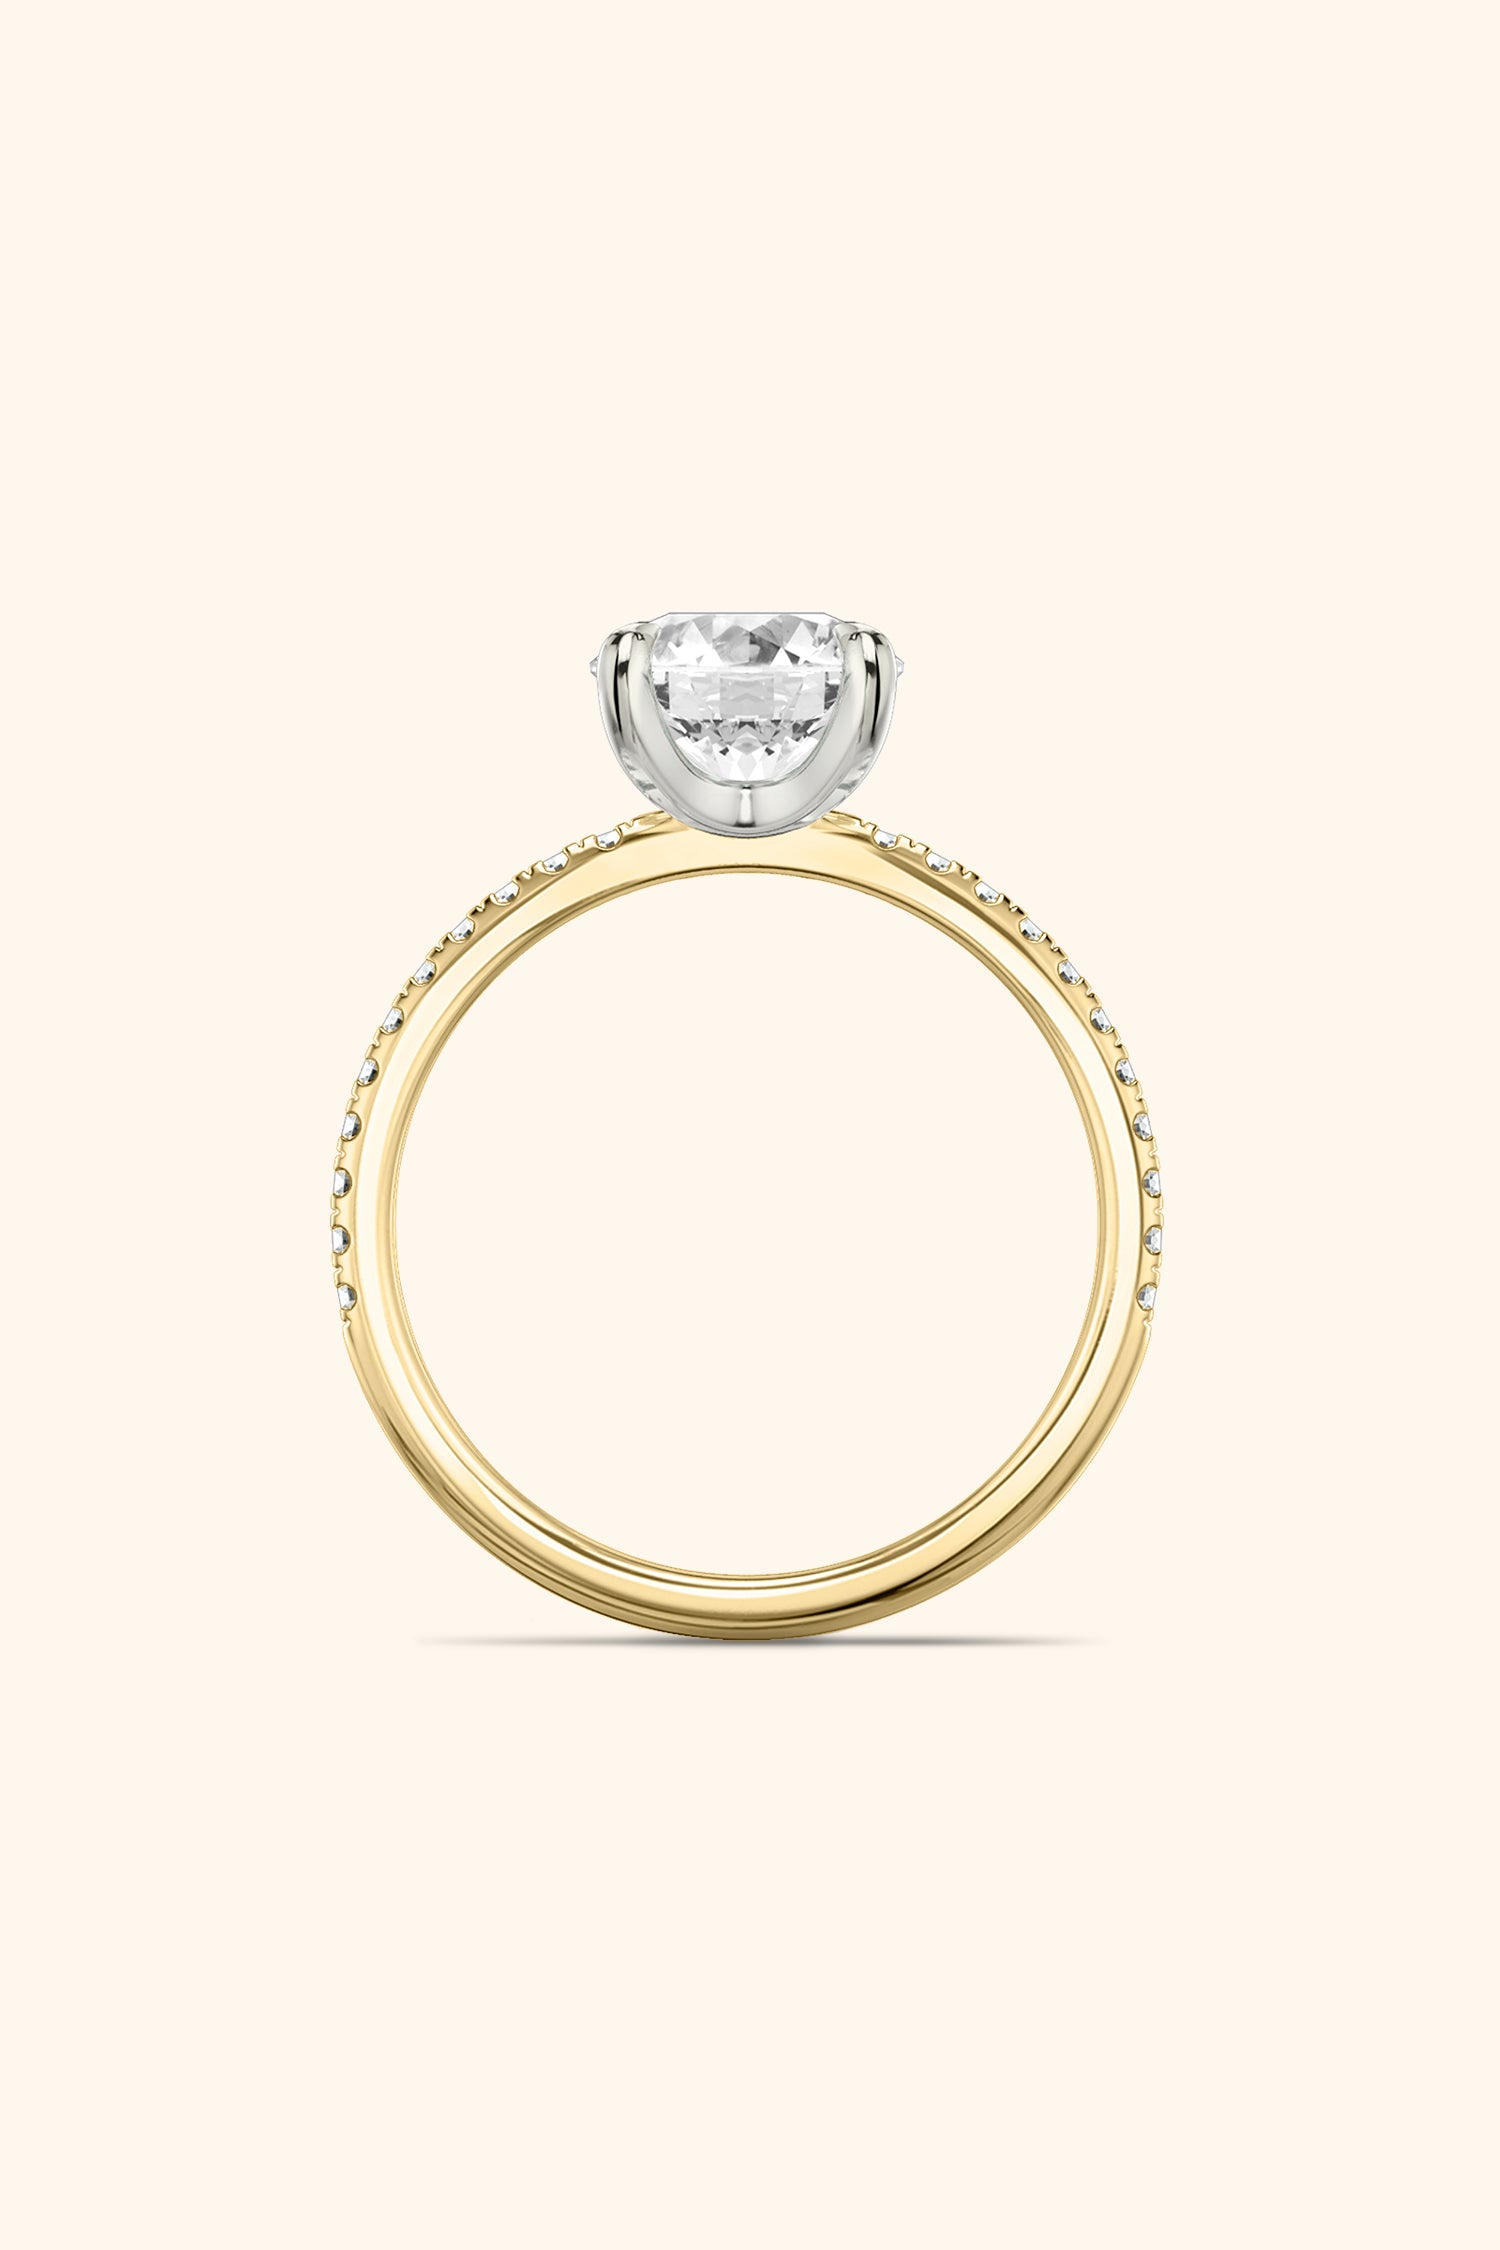 Dual Tone Glance Pave Ring with Round Brilliant Solitaire